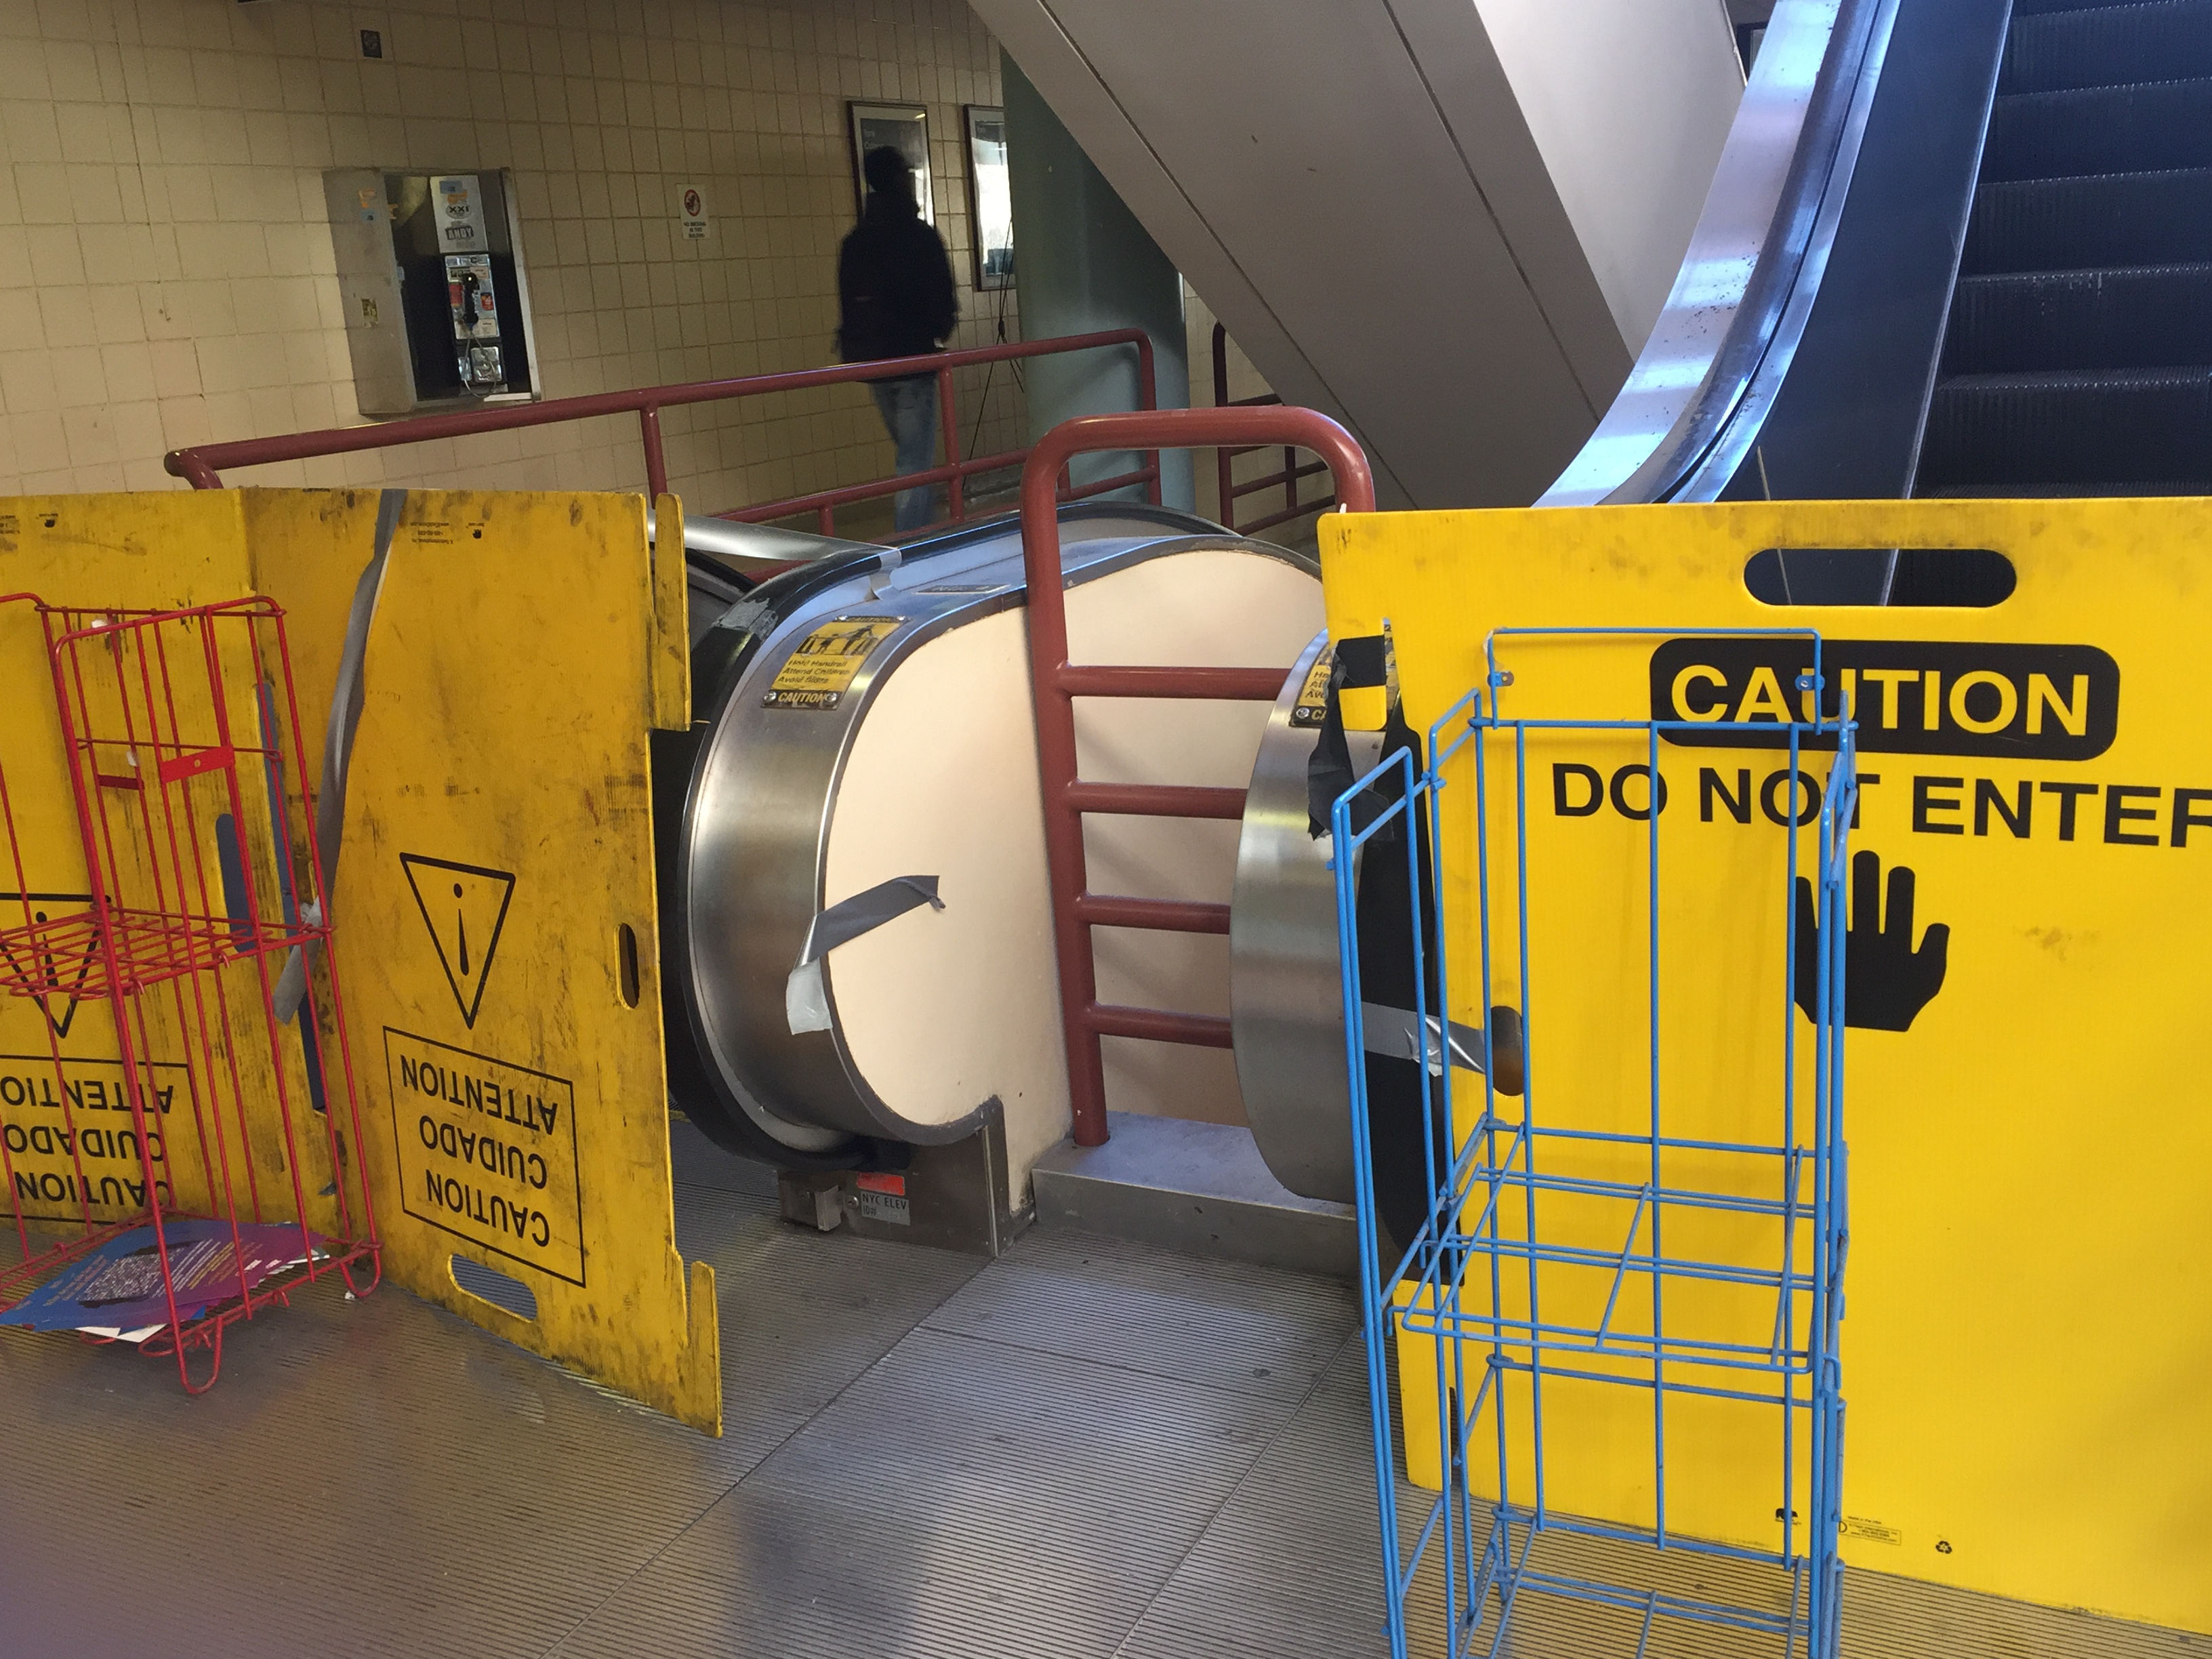 Barricades block students and faculty from using campus escalators. Photo by Valerie Victor